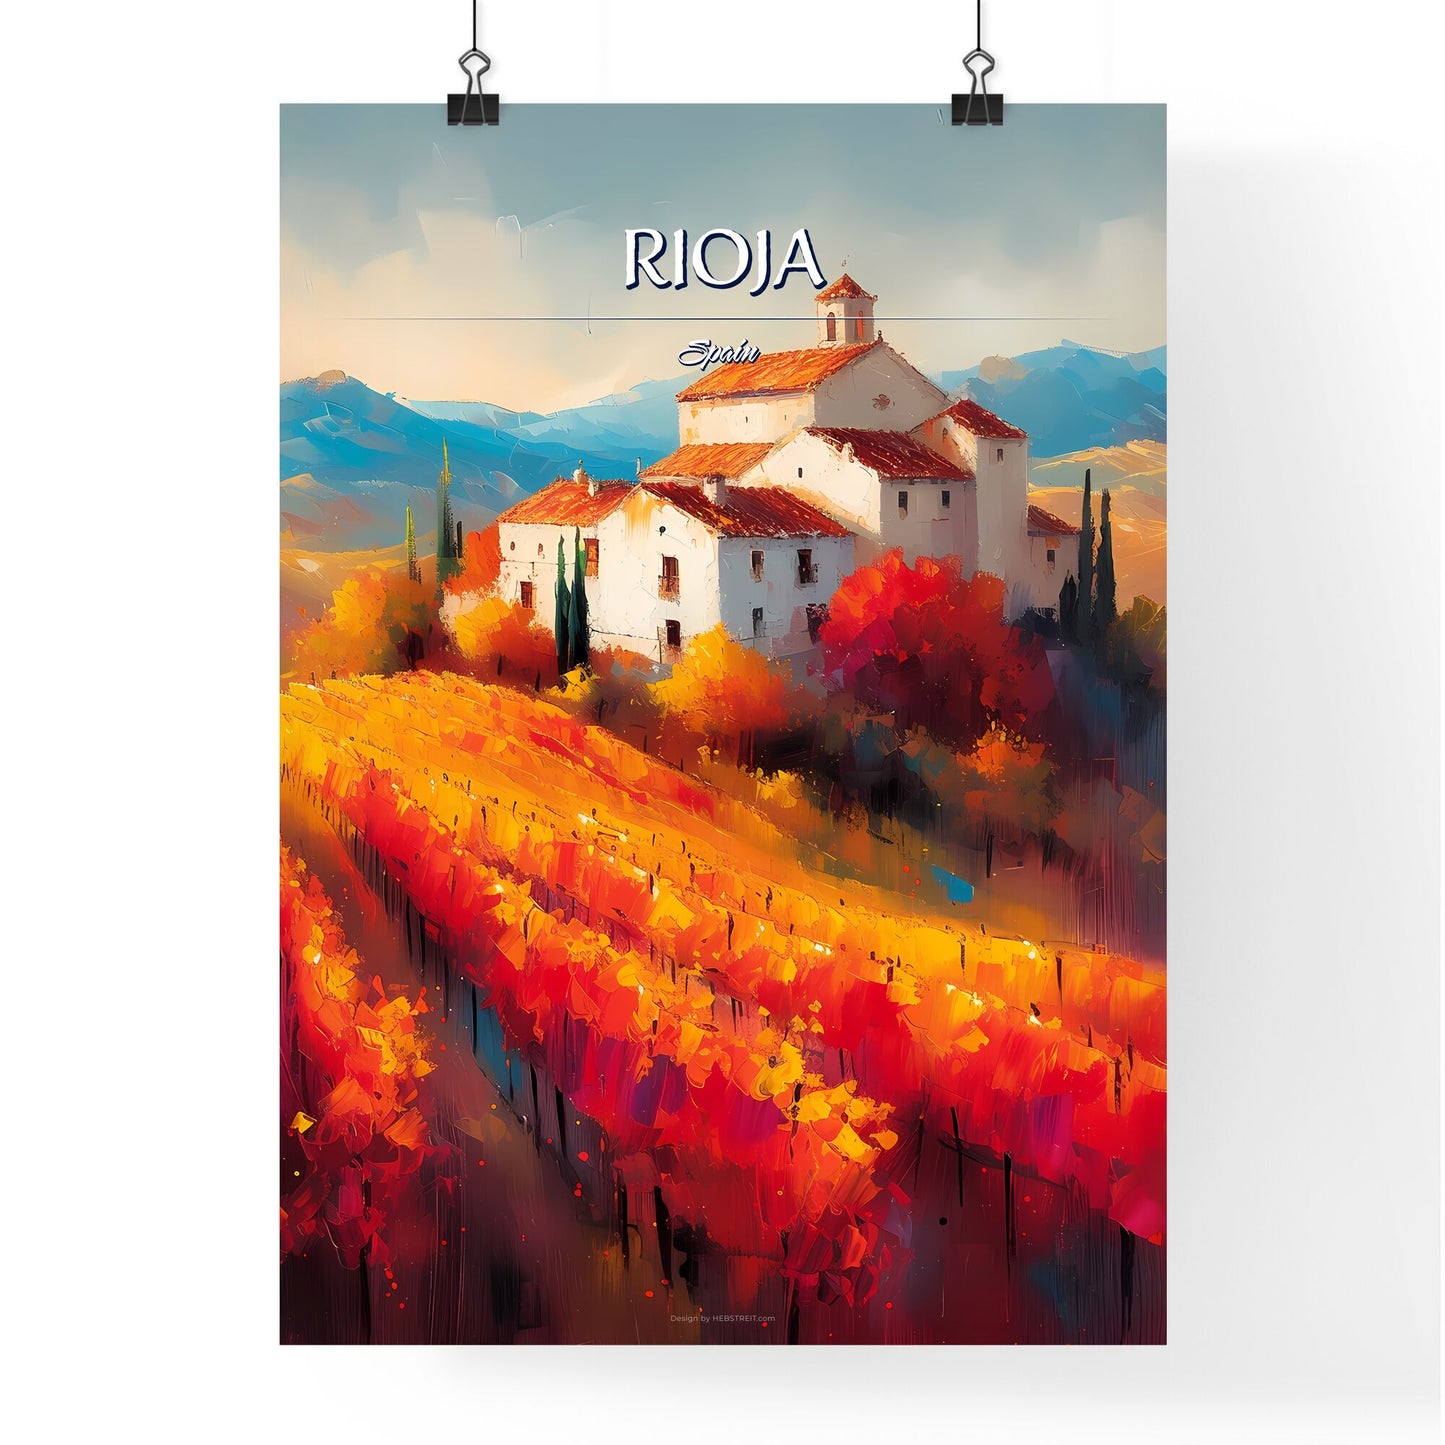 Rioja, Spain - Art print of a painting of a house on a hill with a vineyard Default Title